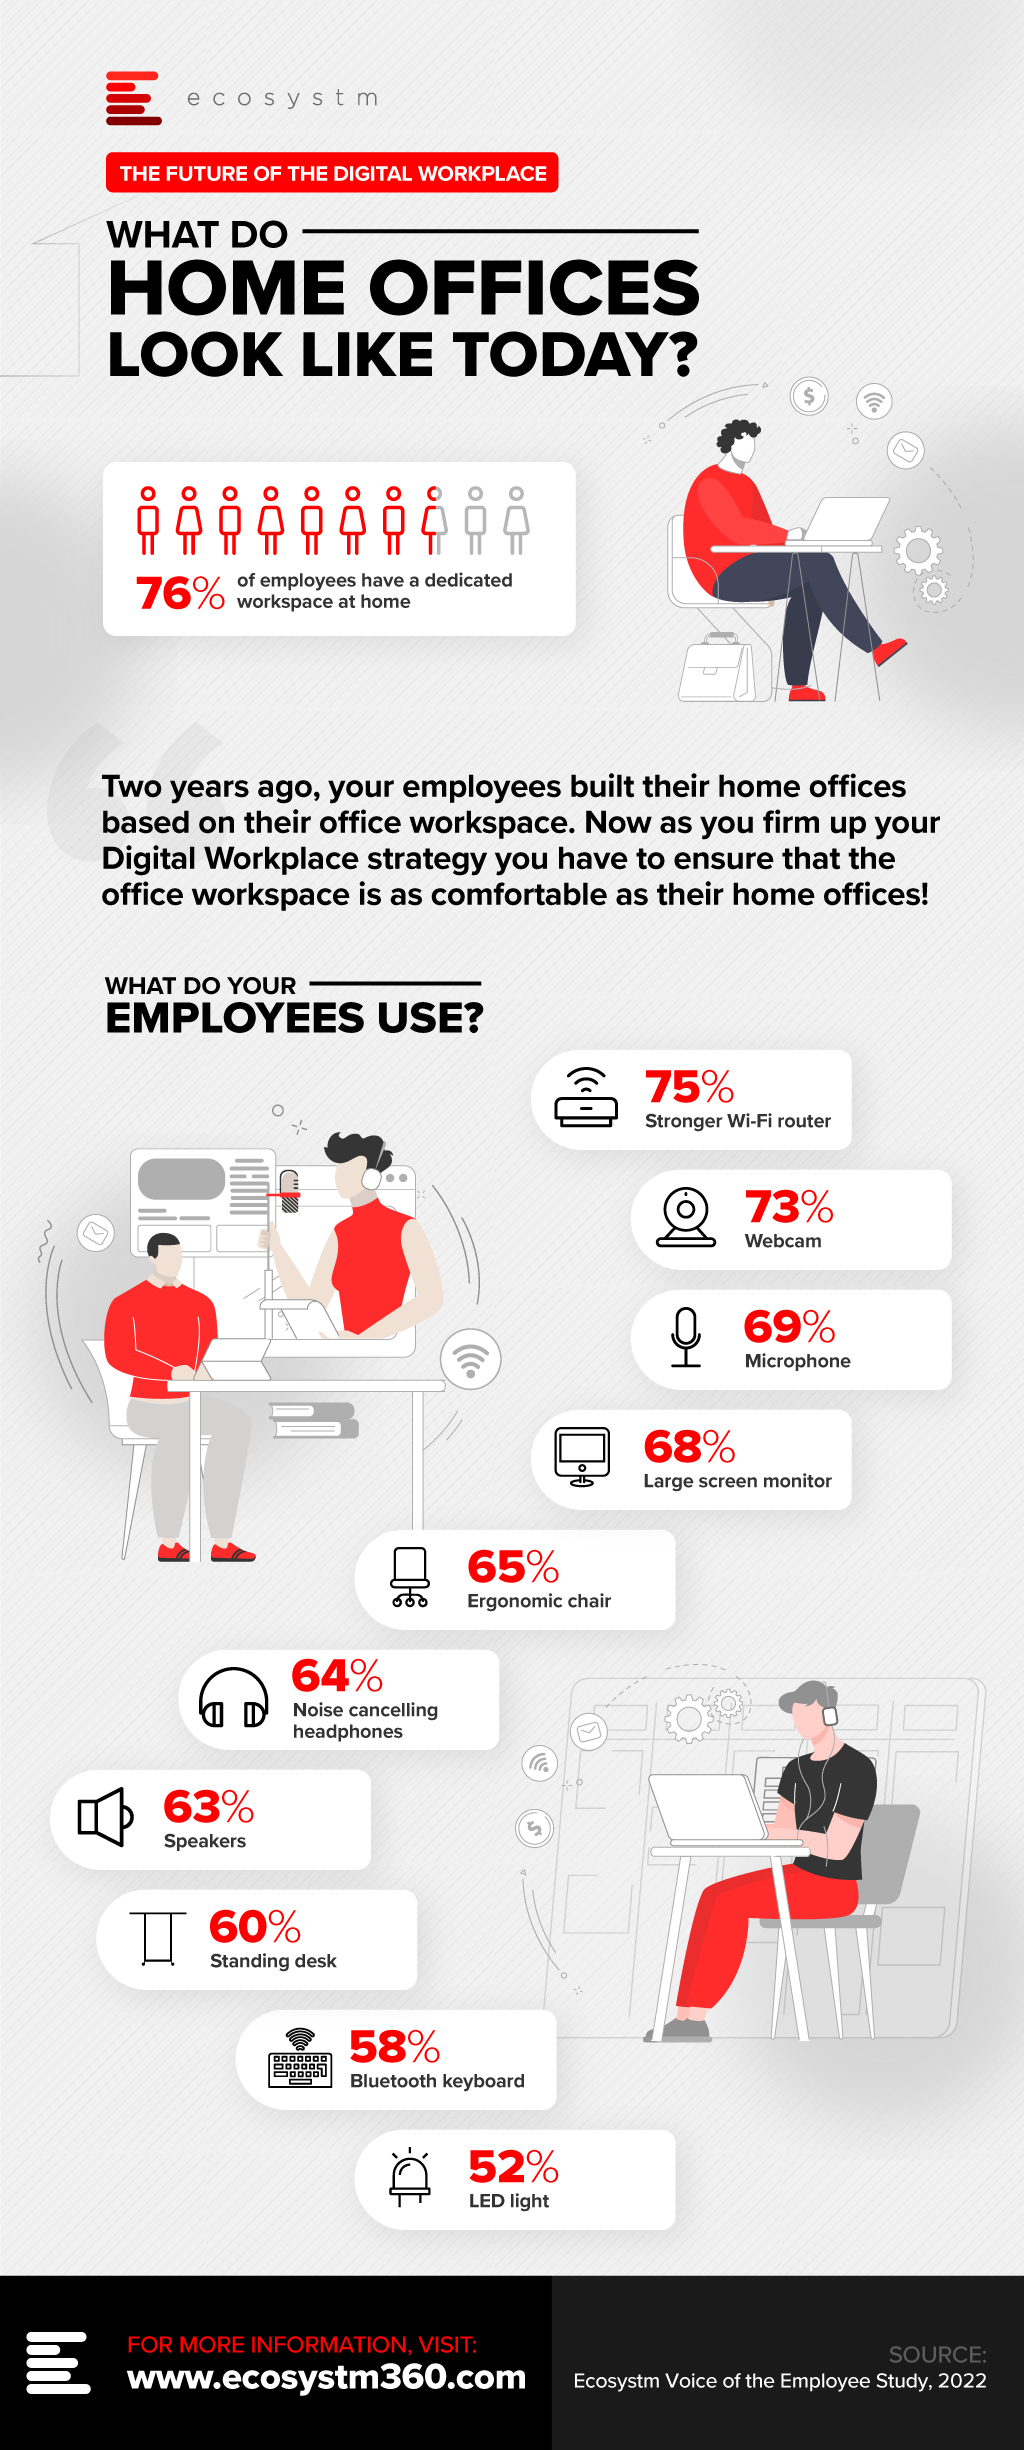 The Future of the Digital Workplace: What Do Home Offices Look Like Today?